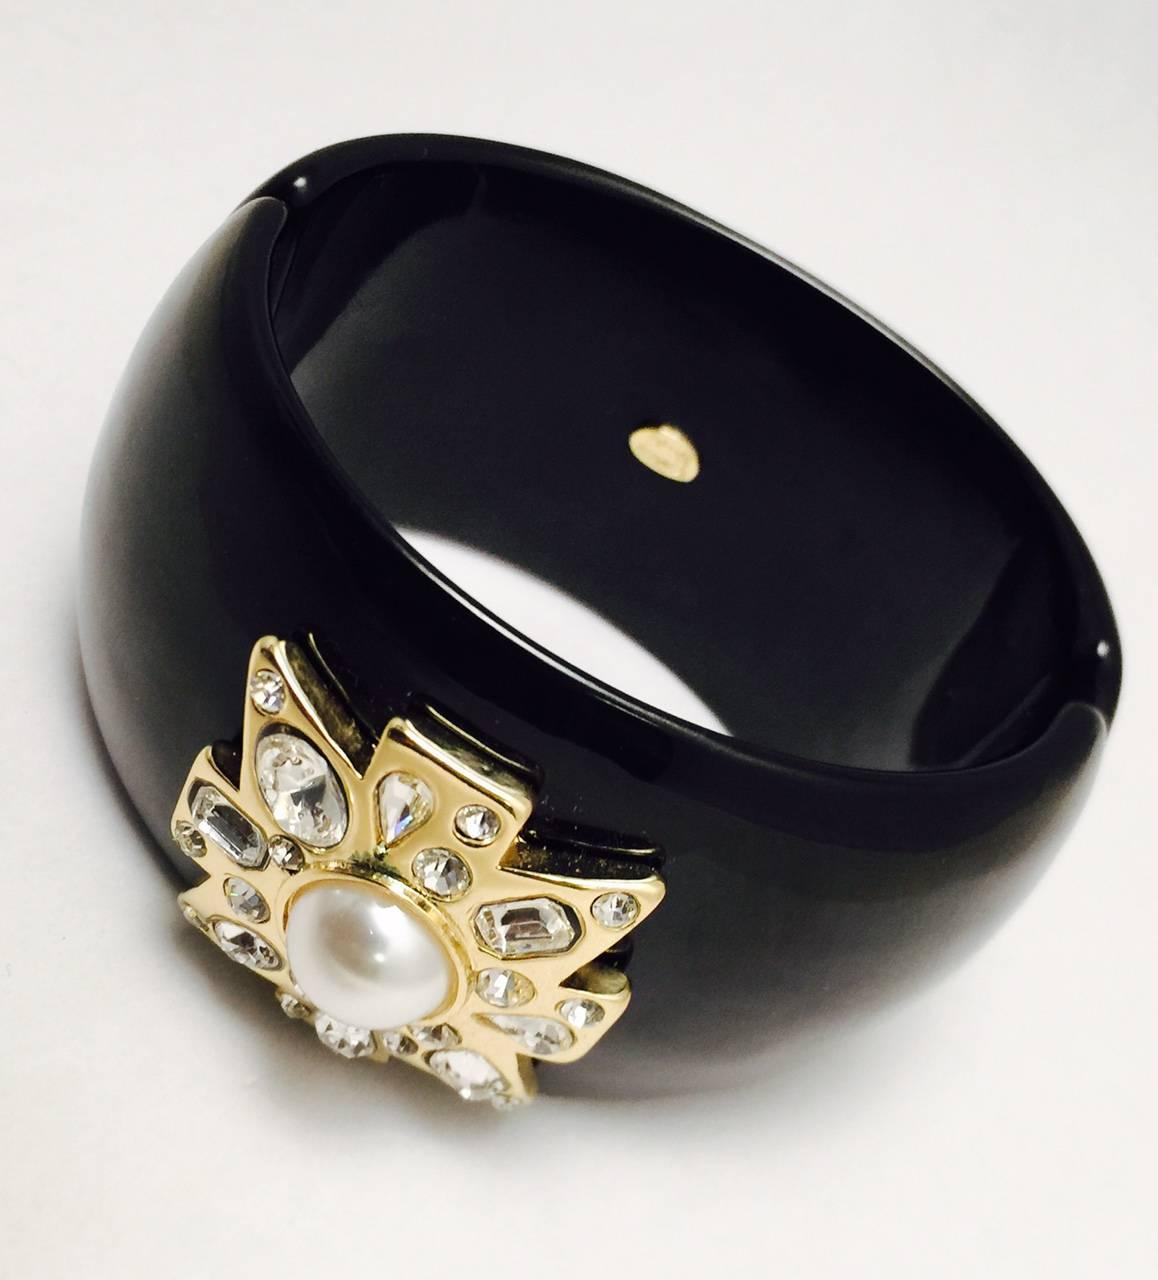 Kenneth Lane pieces are becoming highly collectible!  This fabulous black resin cuff, with magnetic closure, features a stylized Maltese cross embellished with Swarovski crystals in round, oval, pearl and emerald cut shapes, centered with a faux